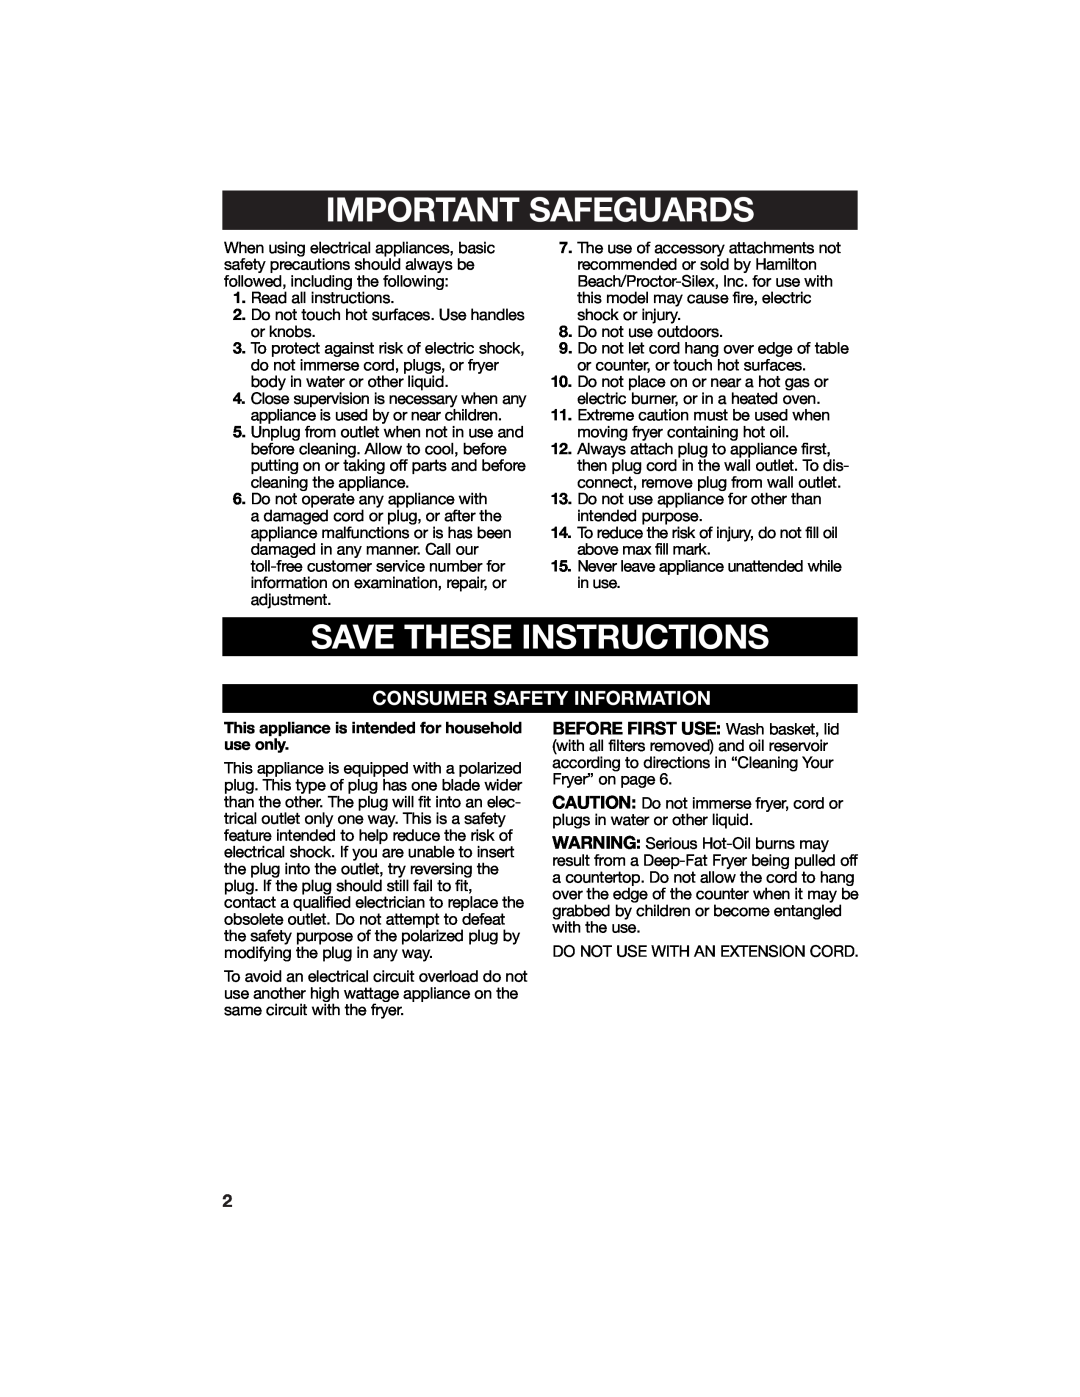 Hamilton Beach 840113900 manual Important Safeguards, Save These Instructions, Consumer Safety Information 